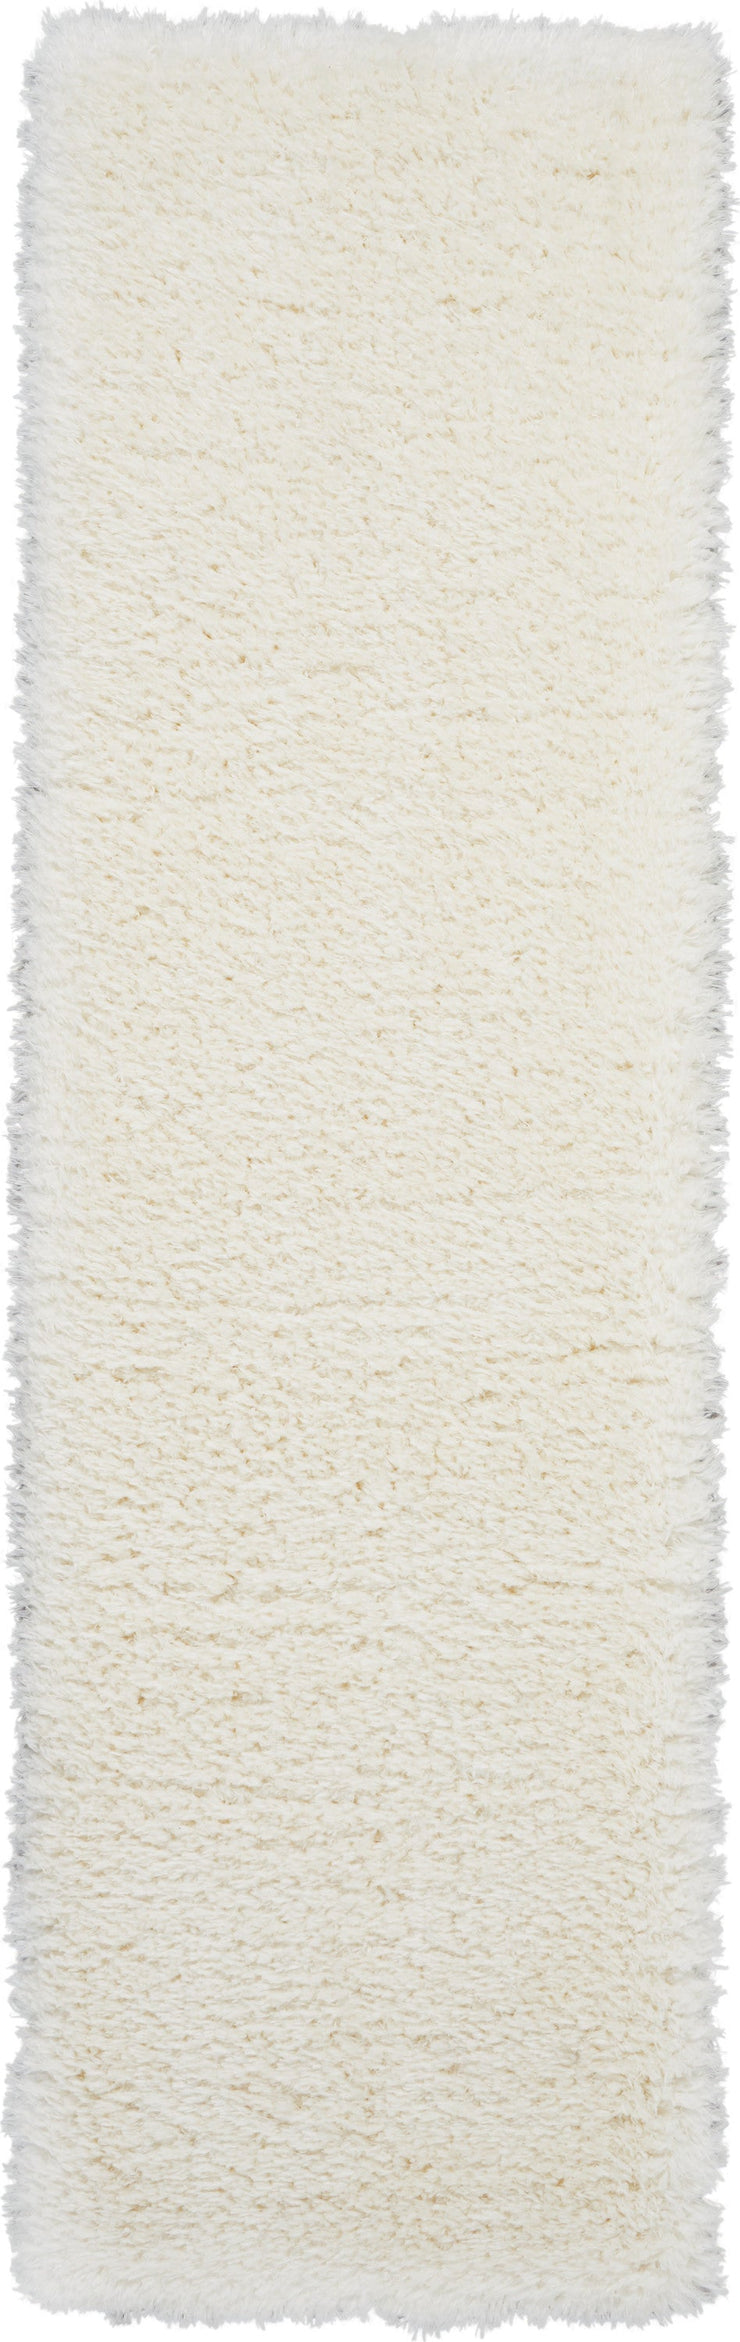 luxe shag ivory rug by nourison 99446459305 redo 2